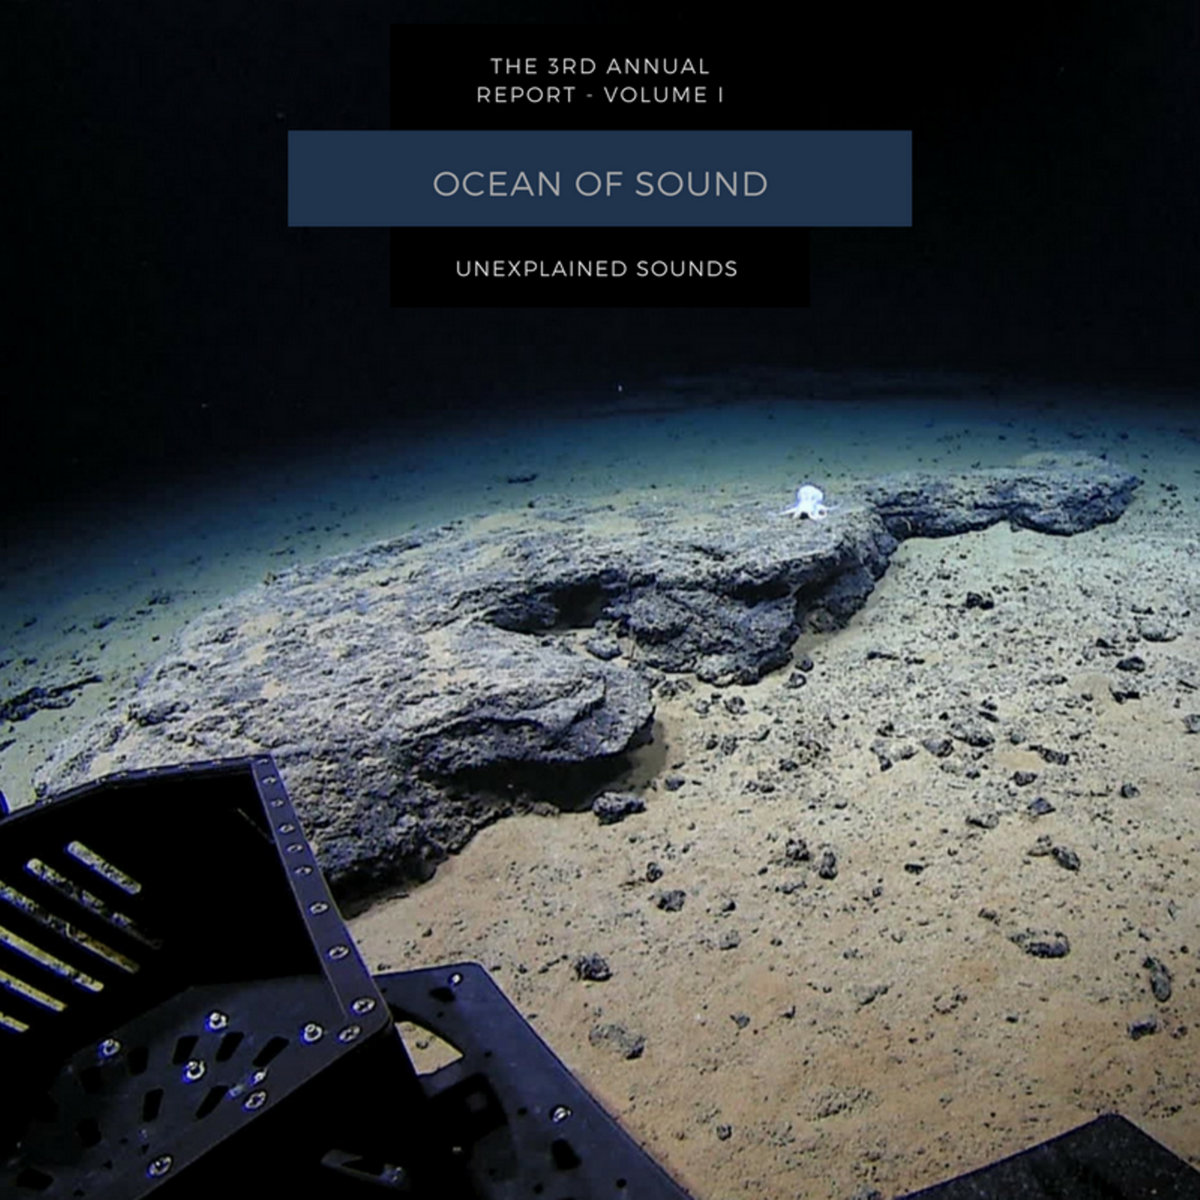 Unsized appears on Ocean of Sound compilation from Unexplained Sounds